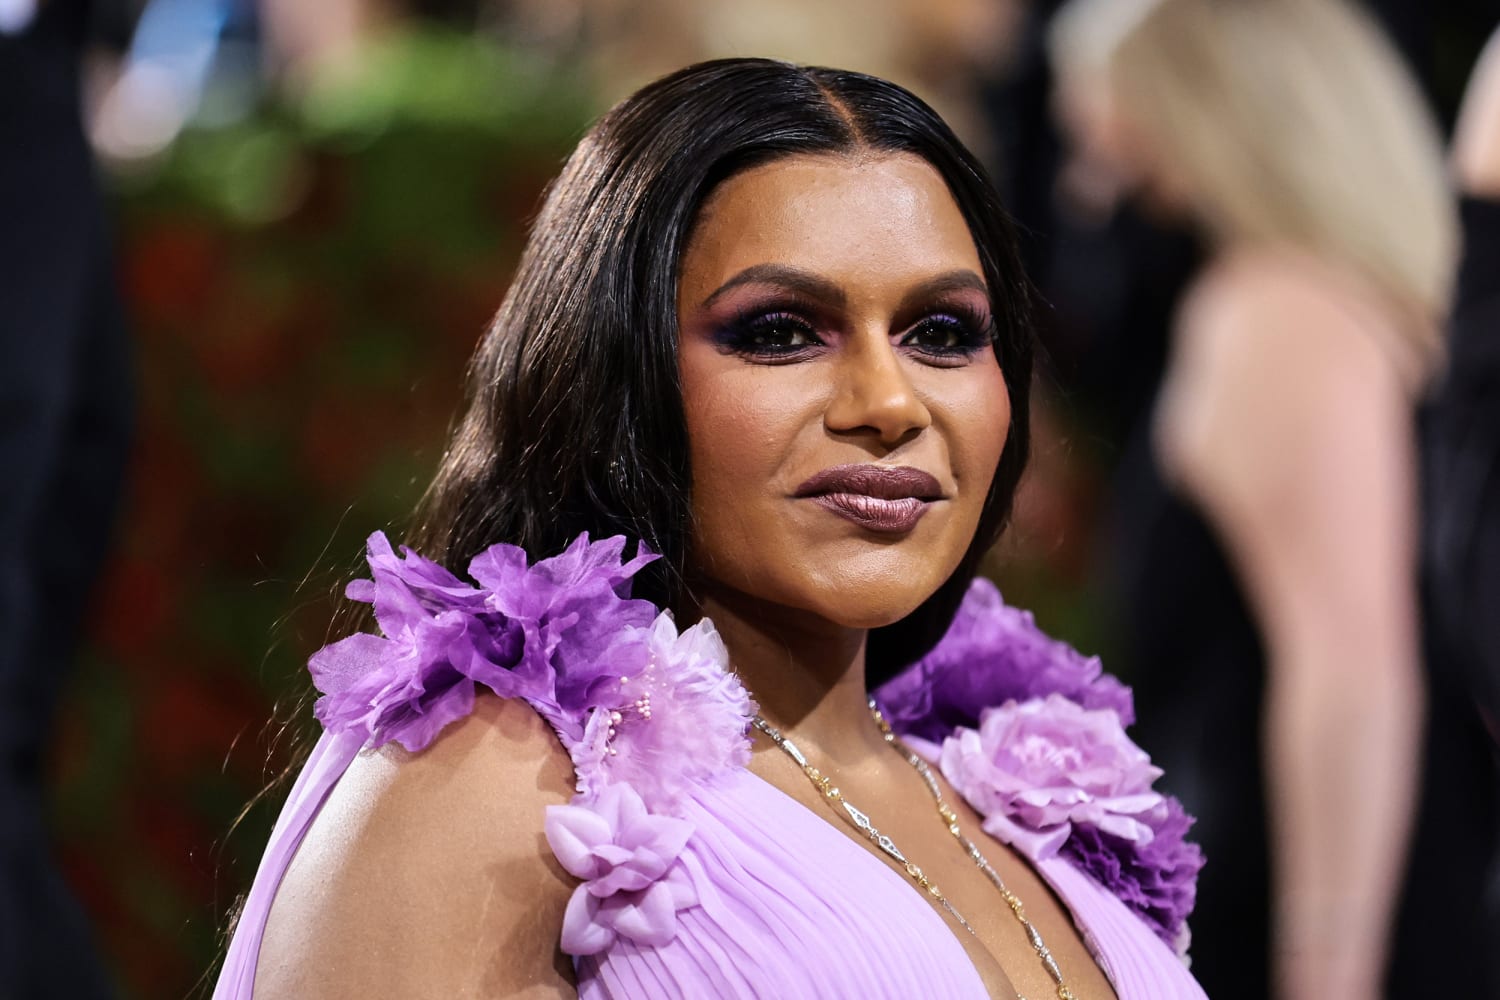 Amid 'Velma' pushback, Mindy Kaling is a 'lightning rod' held to an impossible standard, some critics say